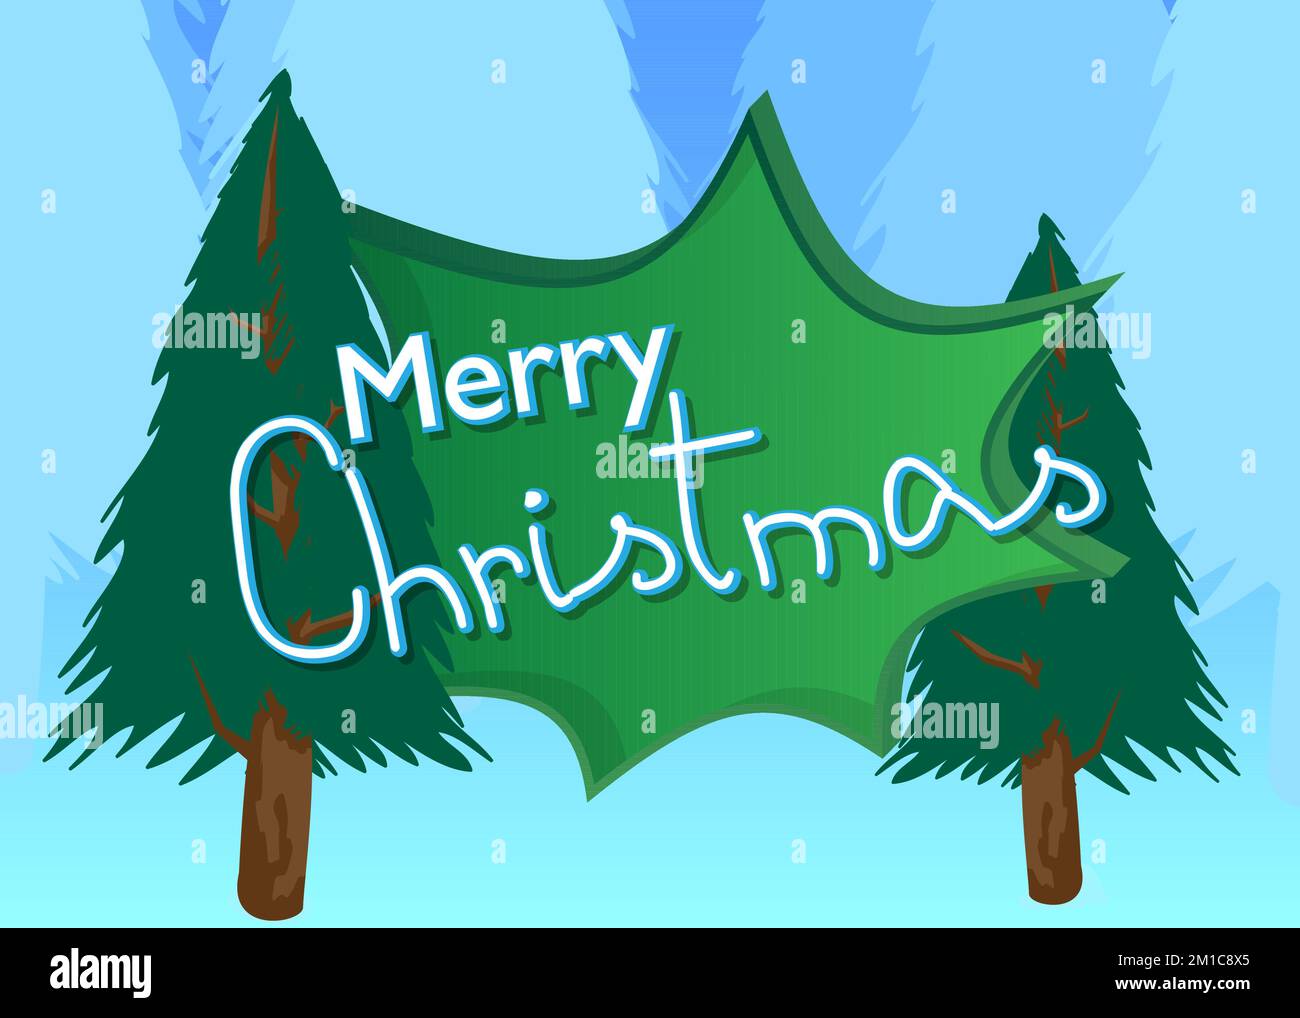 Pine Tree with Merry Christmas text. Winter holiday vector cartoon illustration. Stock Vector